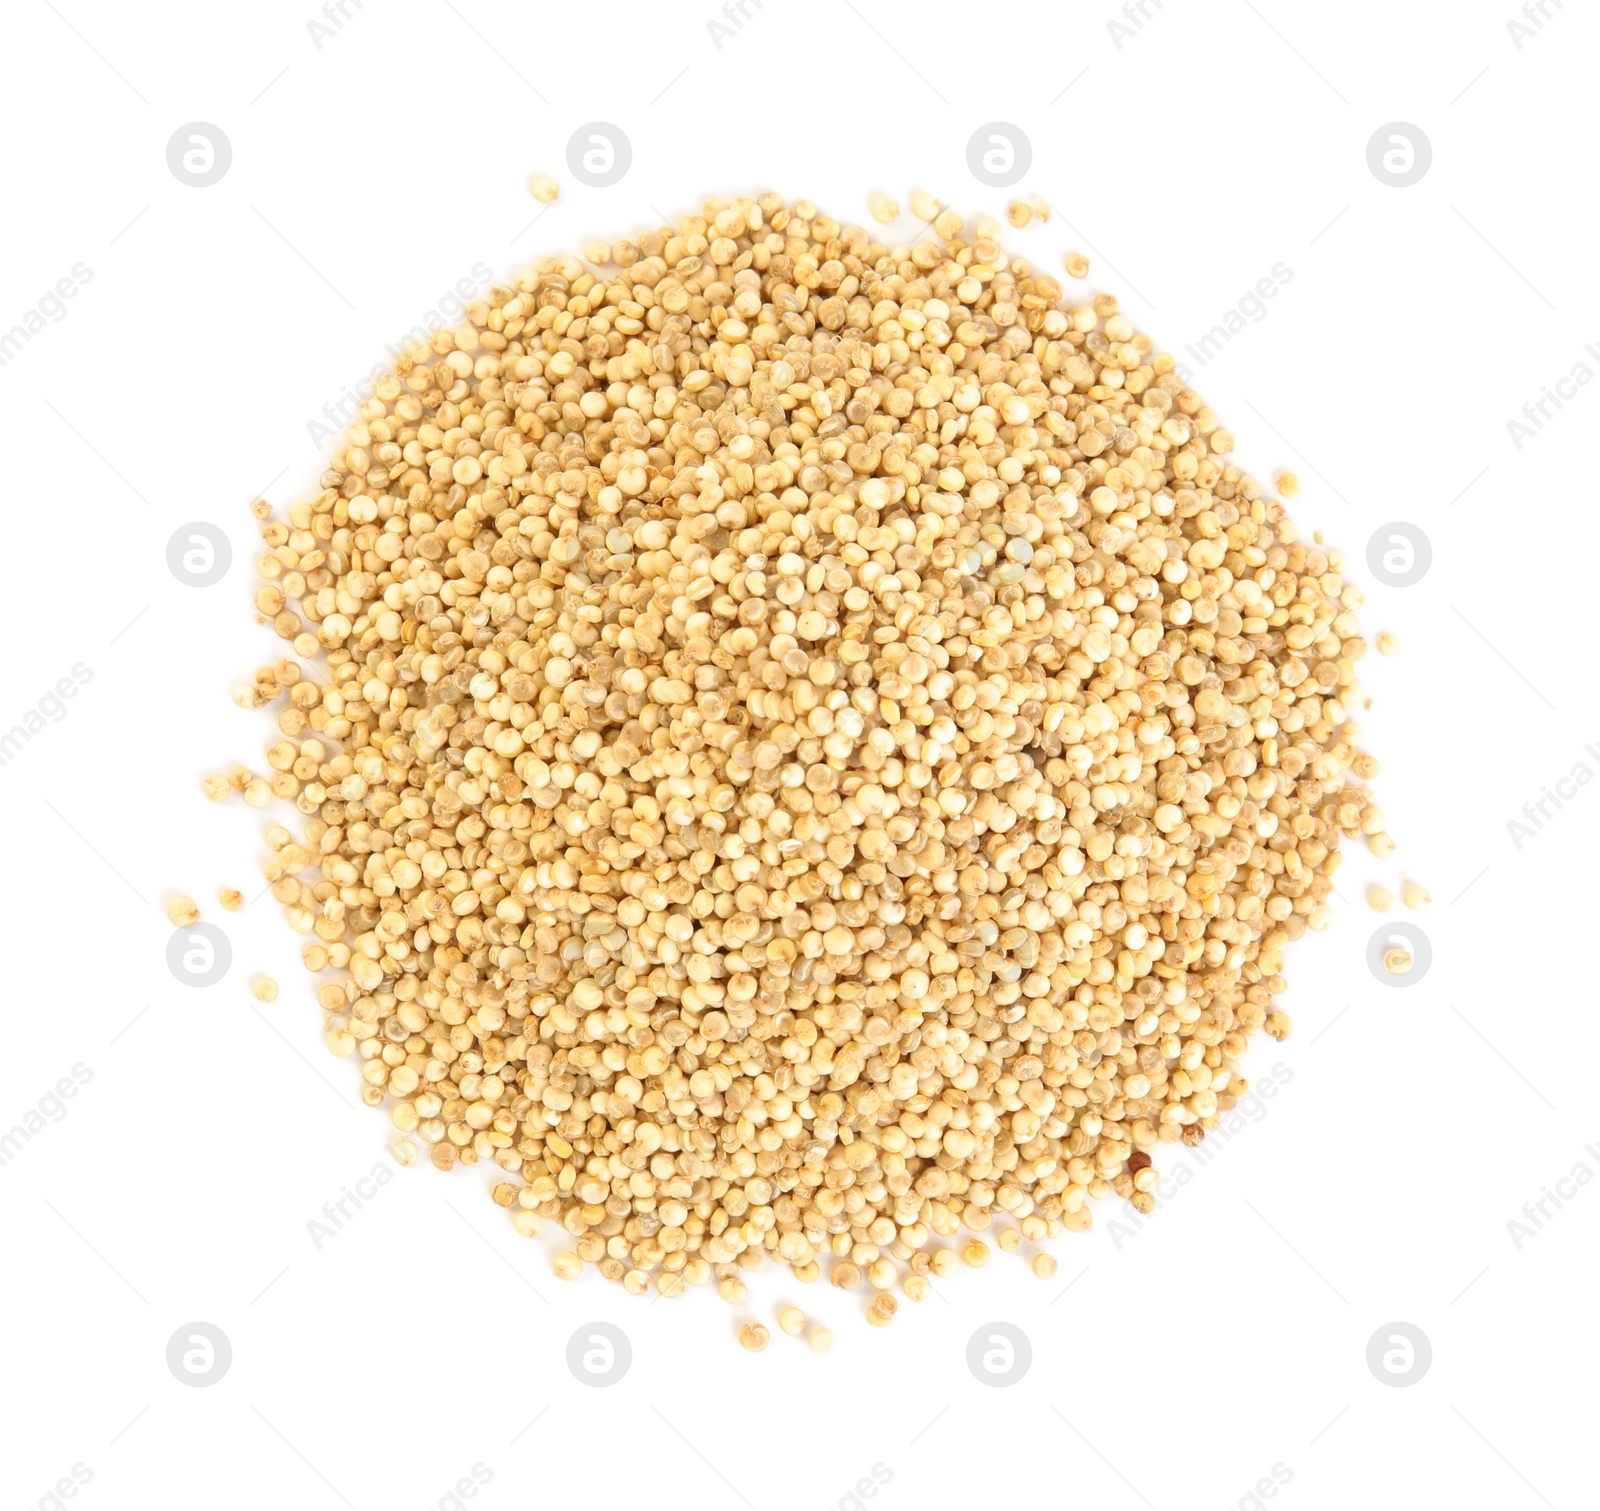 Photo of Pile of raw quinoa grains on white background, top view